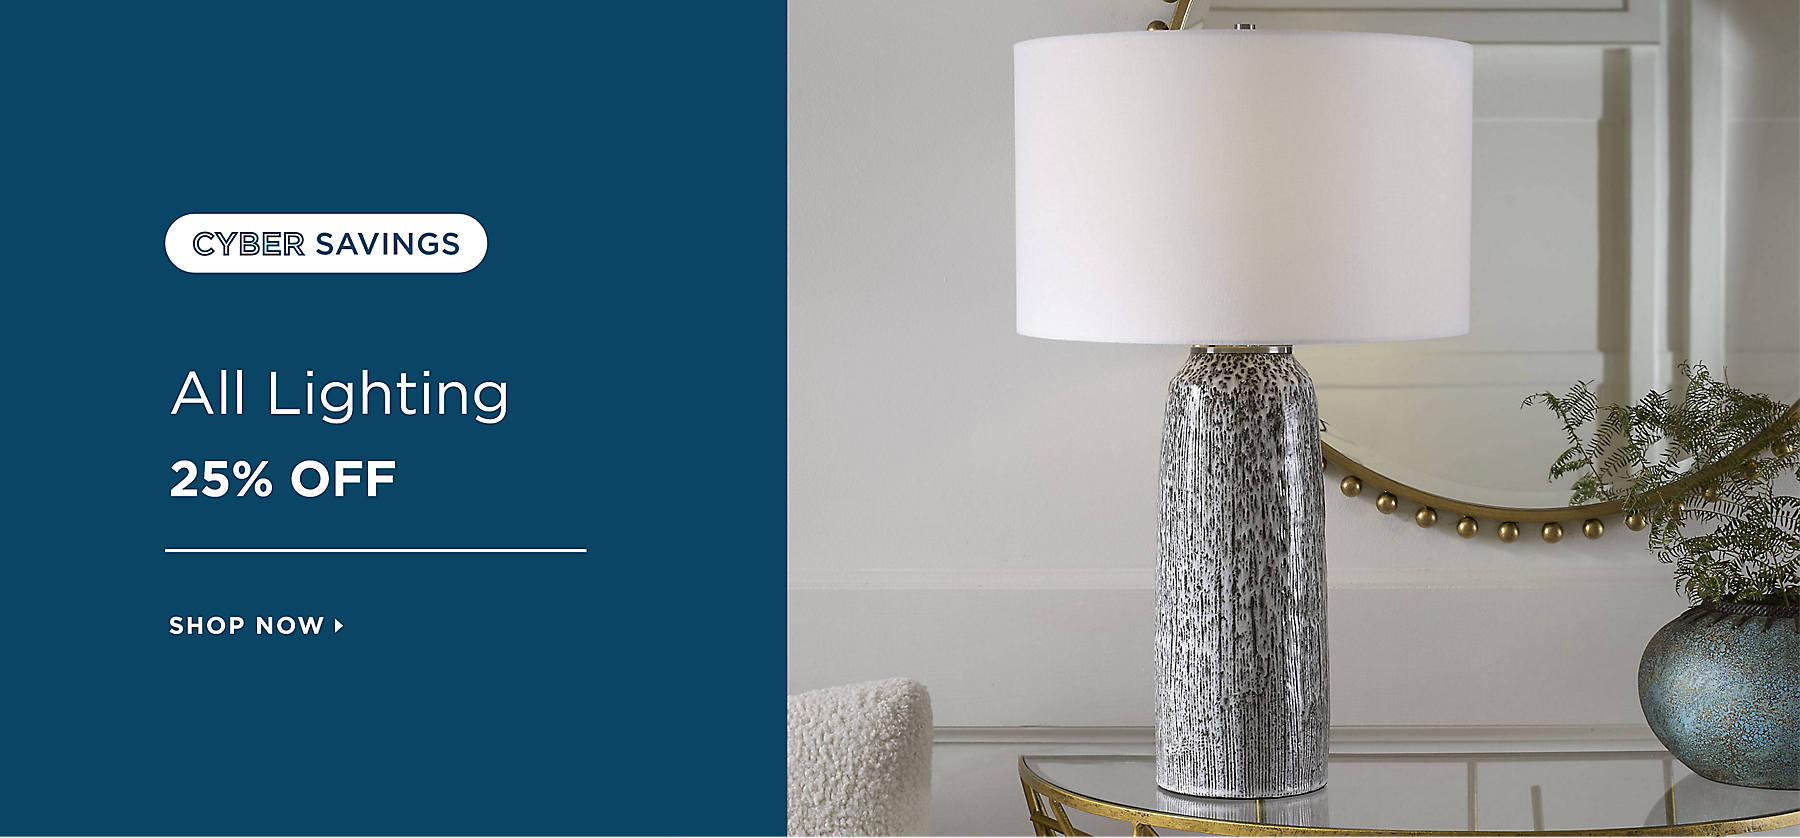 All Lighting 25% Off Shop Now Cyber Savings